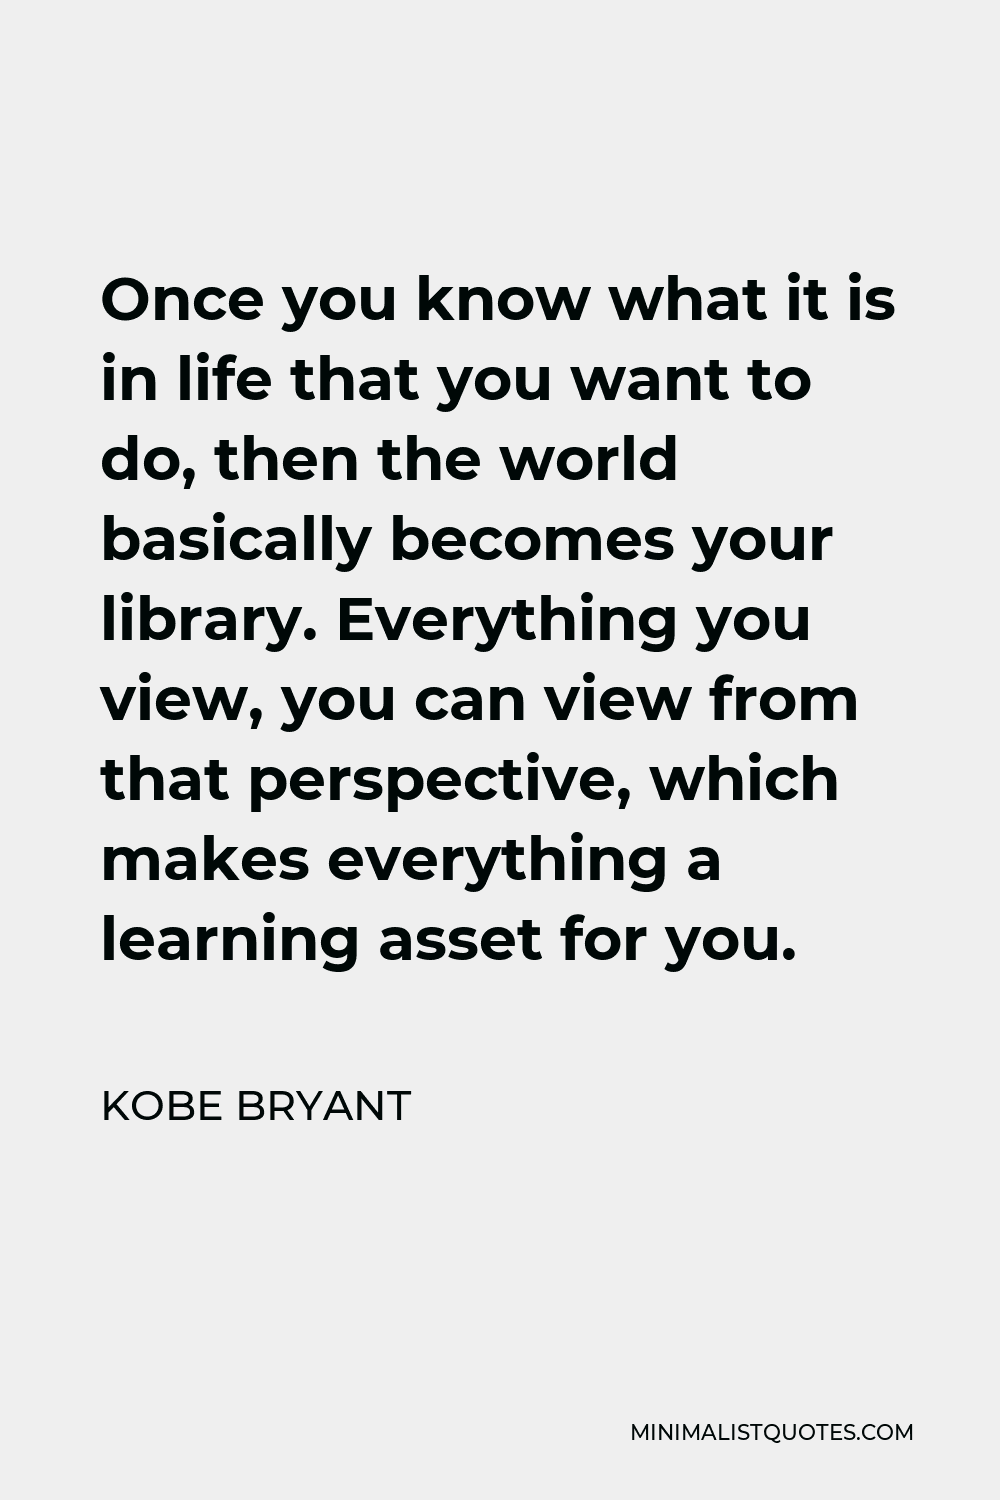 Kobe Bryant Quote - Once you know what it is in life that you want to do, then the world basically becomes your library. Everything you view, you can view from that perspective, which makes everything a learning asset for you.